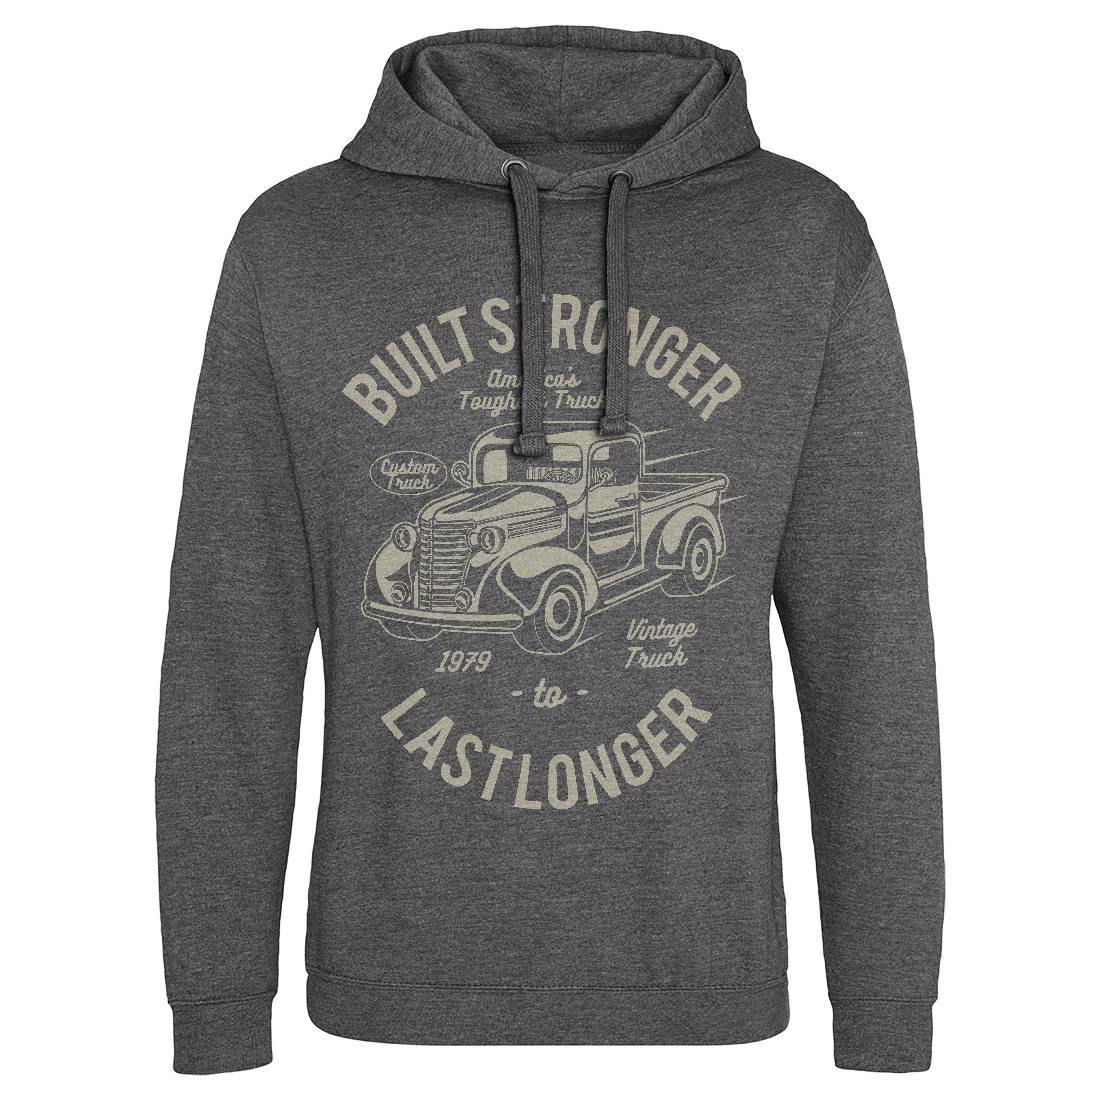 Built Stronger Mens Hoodie Without Pocket Cars A023